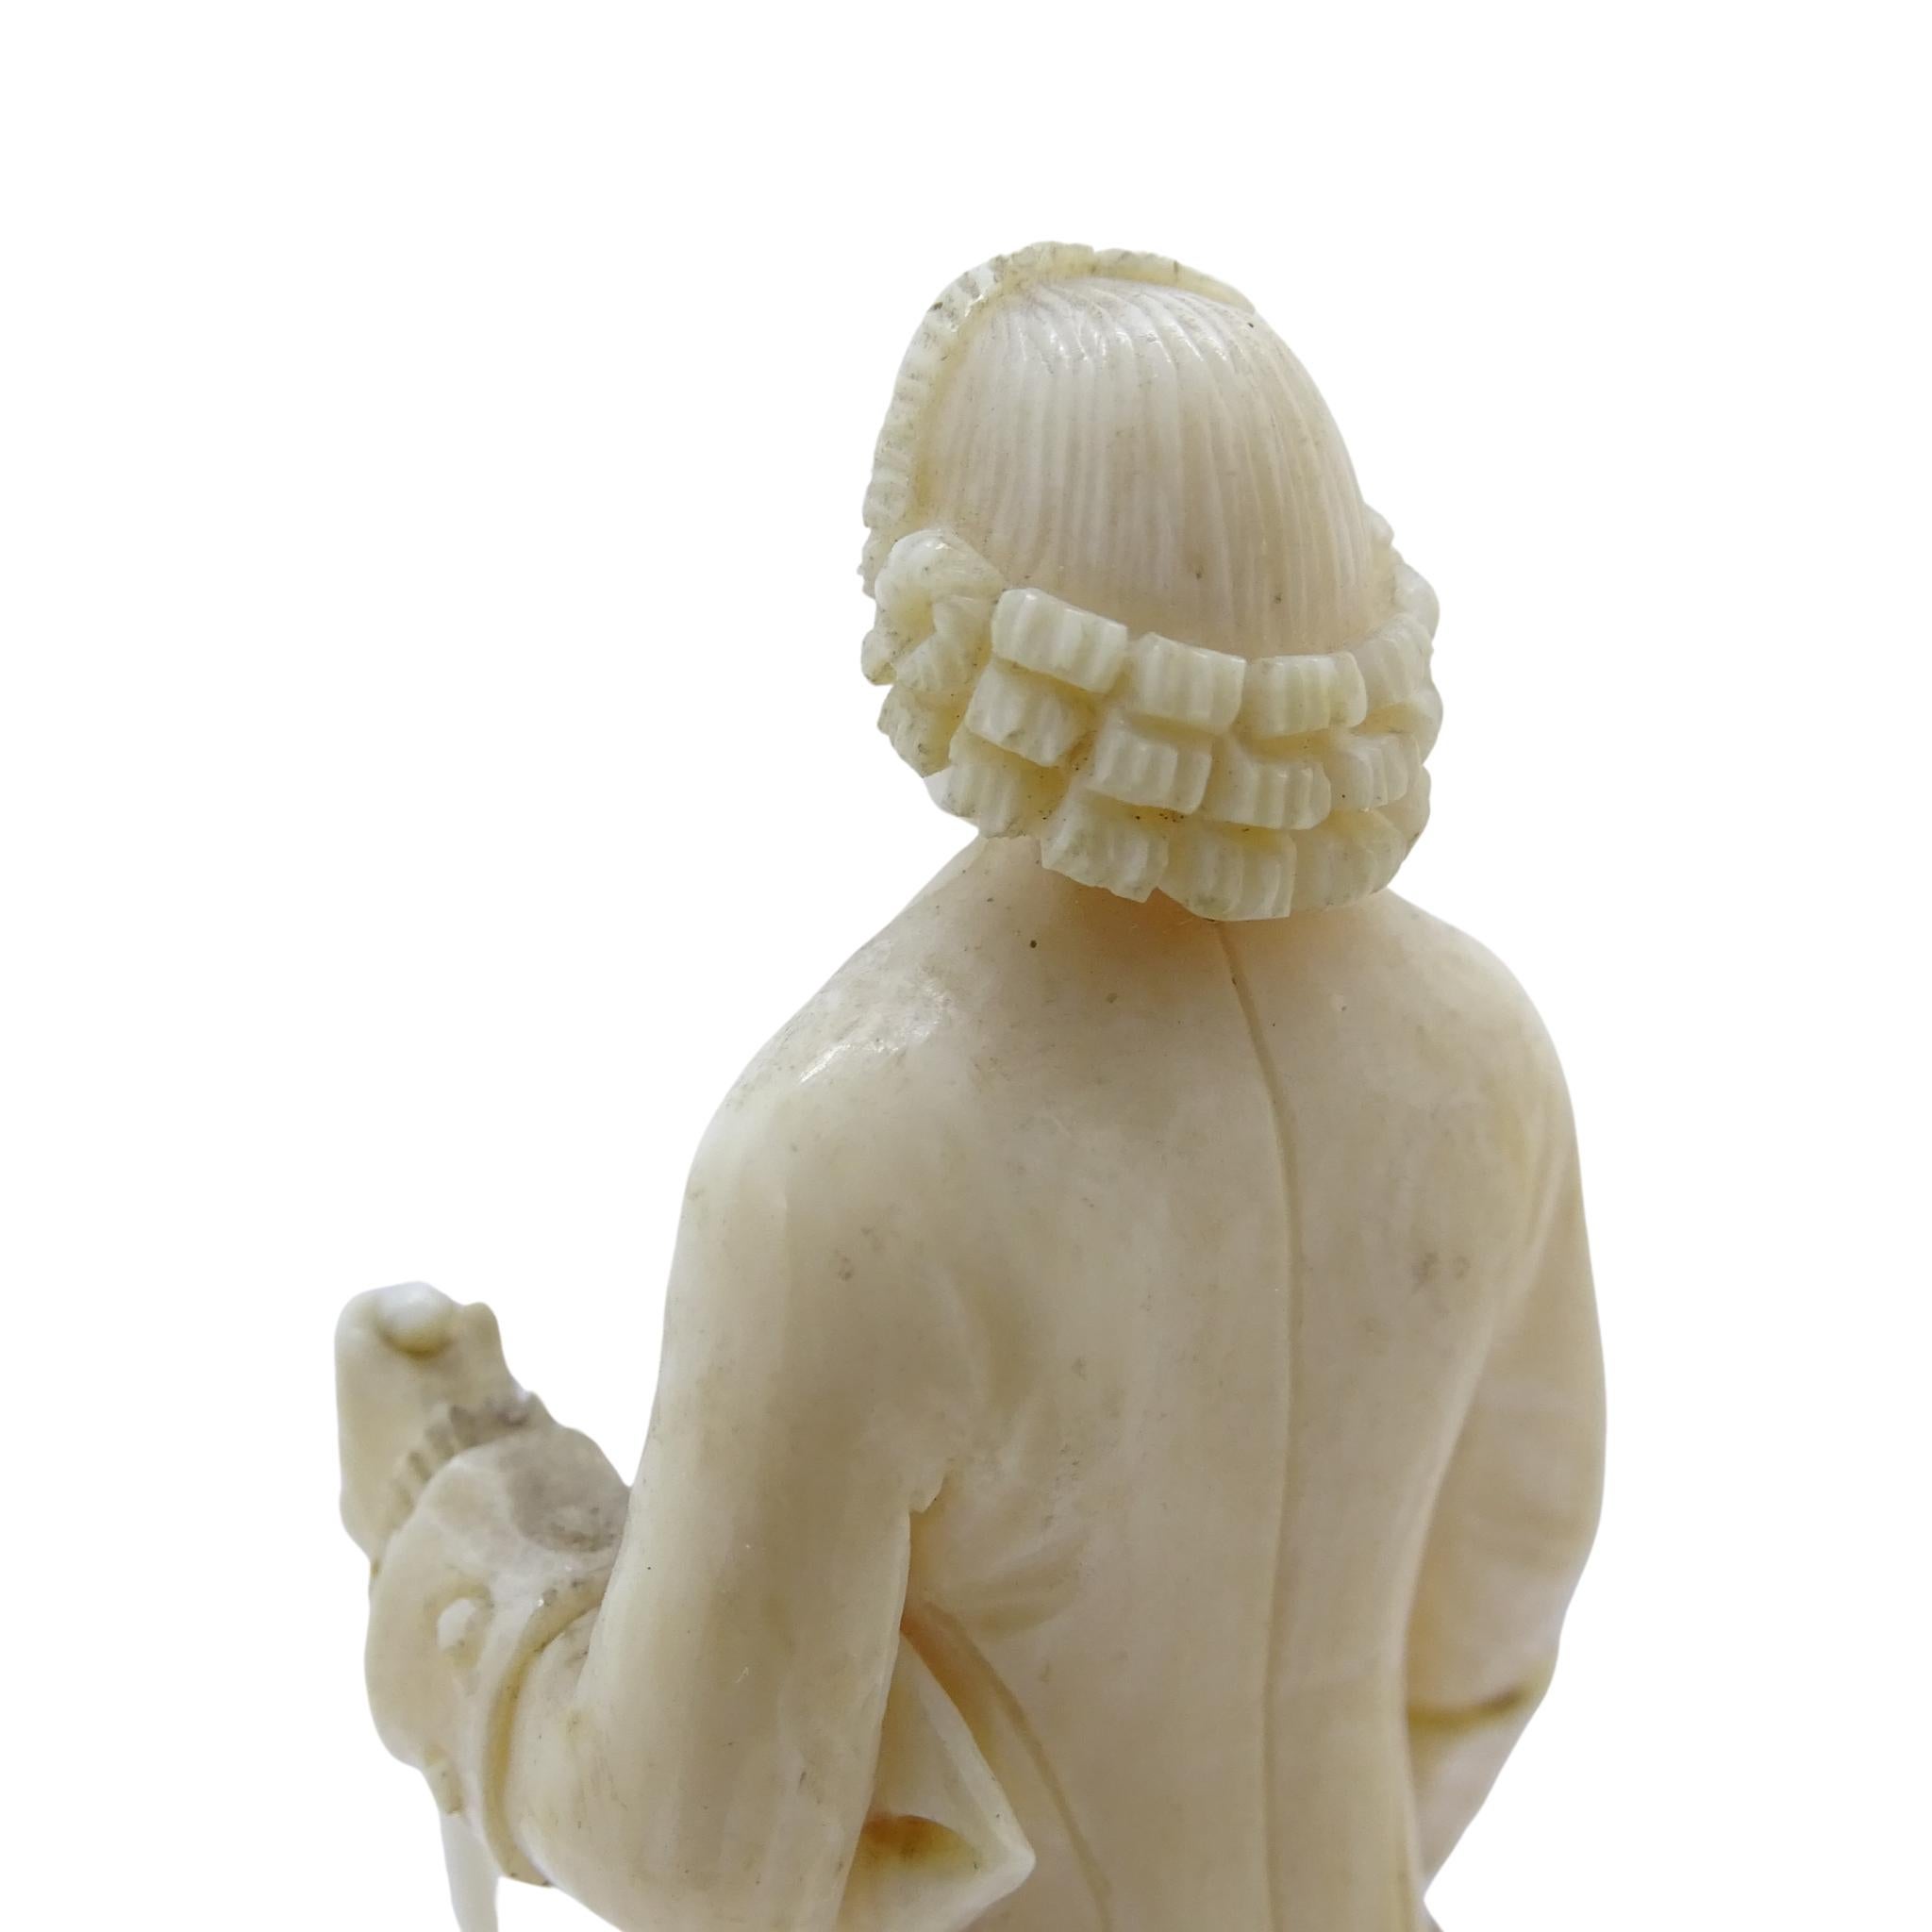  French 18thcentury Diderot sculpture, with papers in one hand For Sale 10